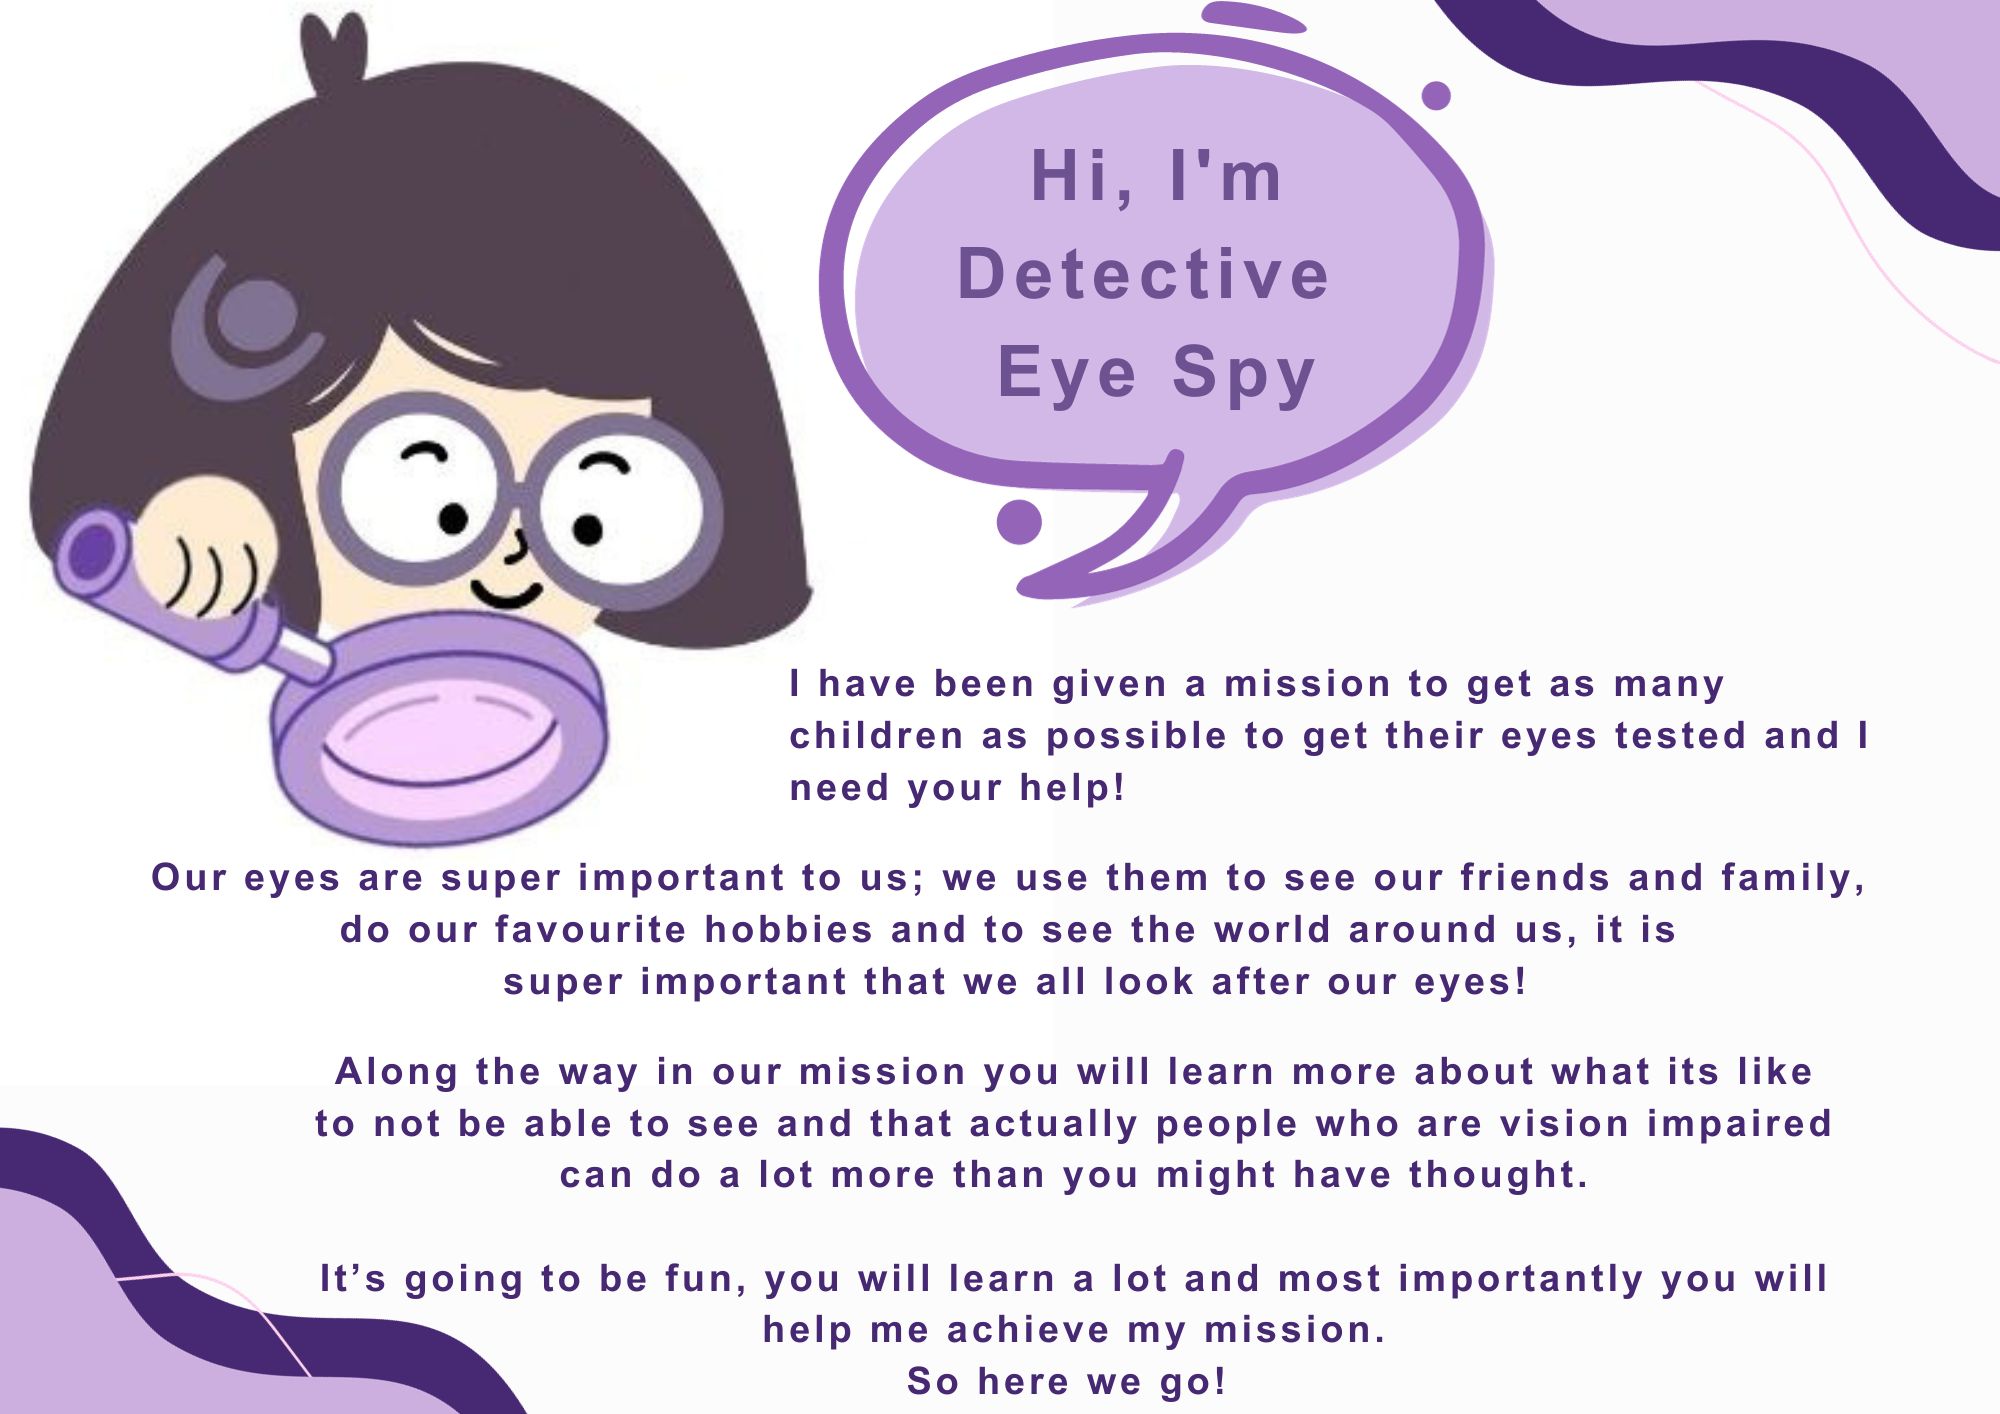 Illustration of a young girl with glasses holding a magnifying glass. A speech bubble next to her says 'Hi, I'm detective eye spy' Underneath text says 'I have been given a mission to get as many children as possible to get their eyes tested and I need your help! Our eyes are super important to us; we use them to see our friends and family, do our favourite hobbies and to see the world around us, it is super important that we all look after our eyes! Along the way in our mission you will learn more about what its like to not be able to see and that actually people who are vision impaired can do a lot more than you might have thought. It’s going to be fun, you will learn a lot and most importantly you will help me achieve my mission. So here we go!'